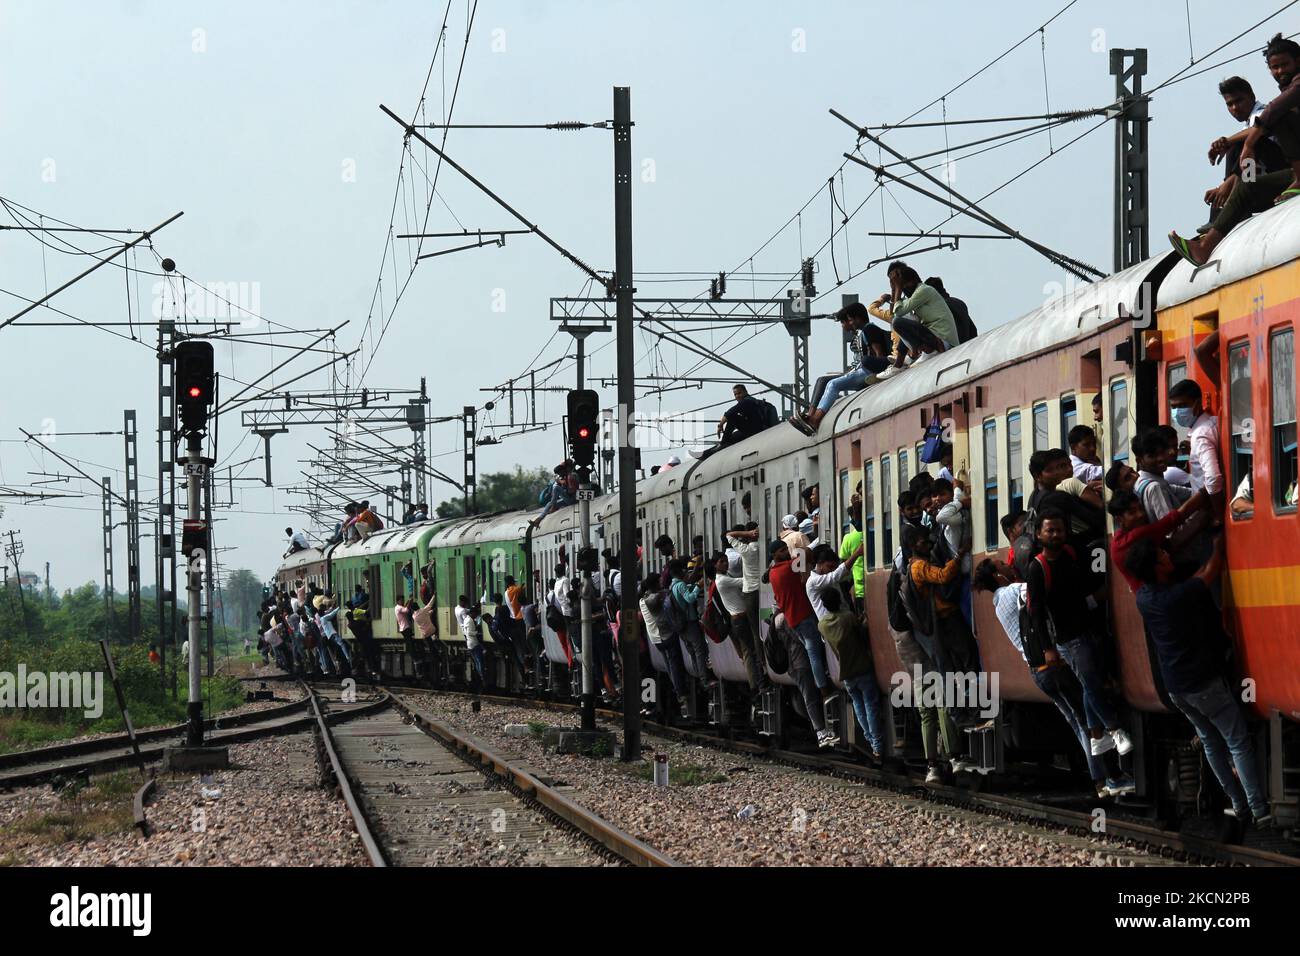 People travel in an overcrowded passenger train as it leaves a railway station amidst the spread of the coronavirus disease (COVID-19), at Ghaziabad in the northern state of Uttar Pradesh, India on September 21, 2021. (Photo by Mayank Makhija/NurPhoto) Stock Photo